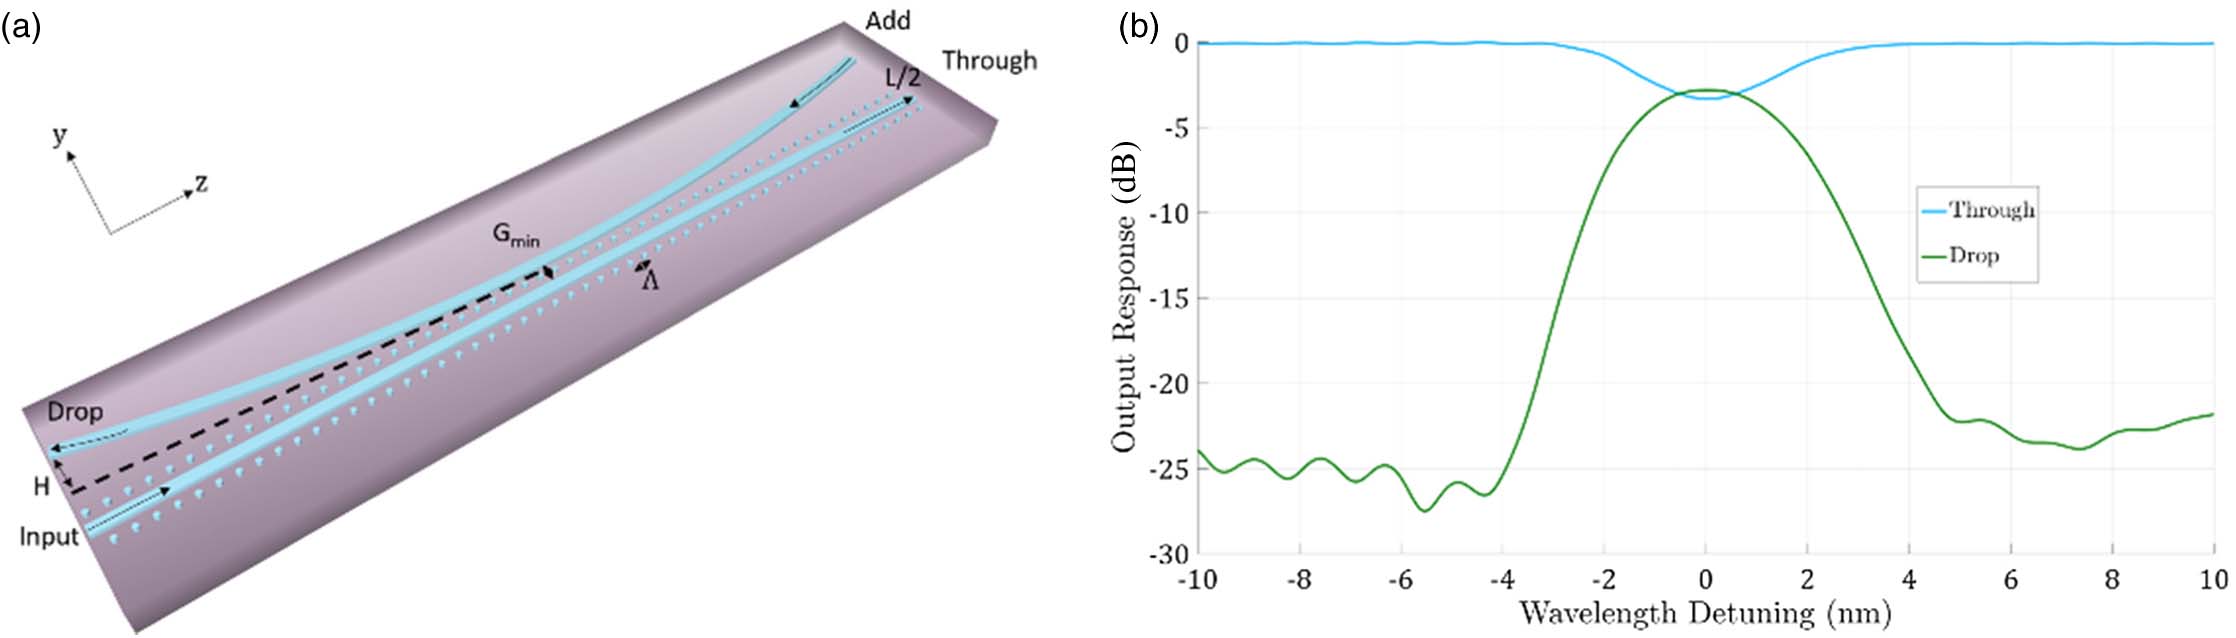 (a) Top-down view of an apodized four-port Bragg add/drop filter. The structure’s simulated spectral response in (b) shows the transmission to the through-port and drop-port with the fabricated device’s parameters of Gmin=0.6 μm, H=0.5 μm, a=2.5, and L=775 μm.